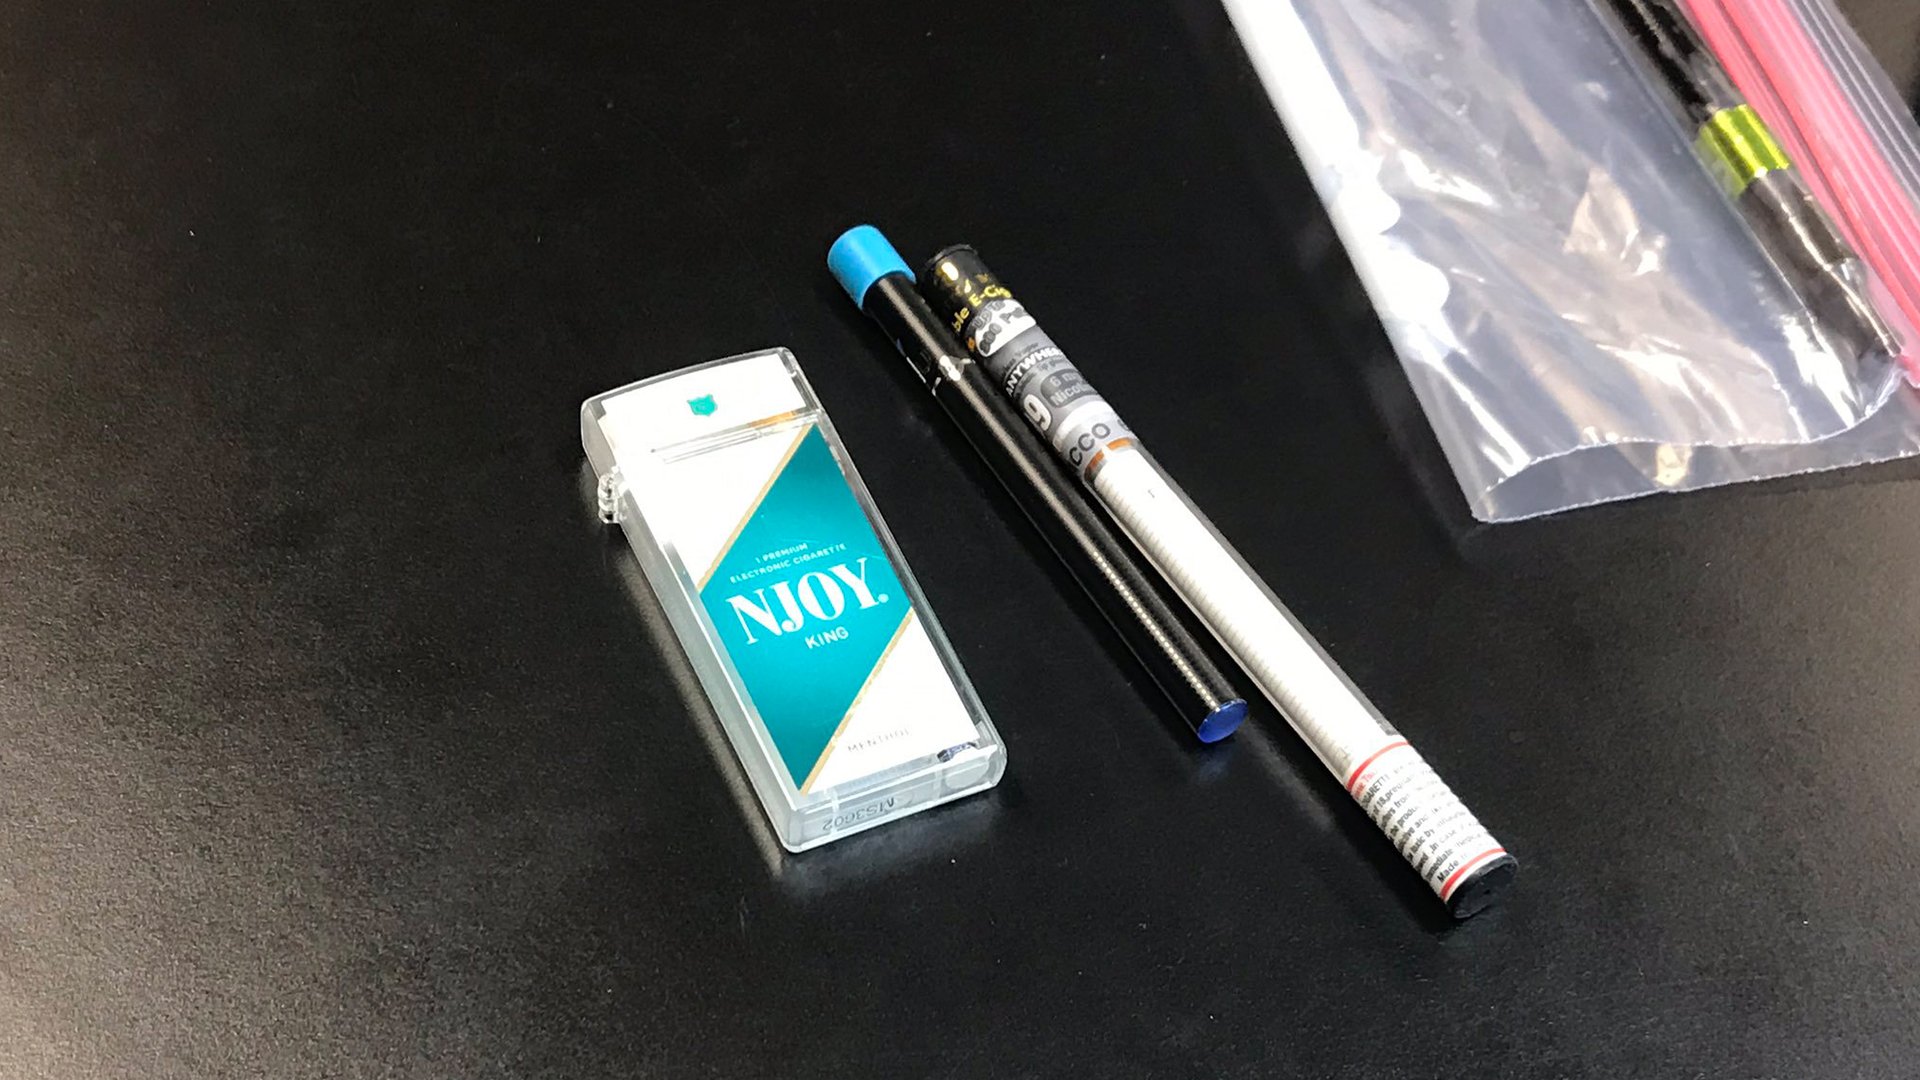 Vaping-related illness reported in Washington